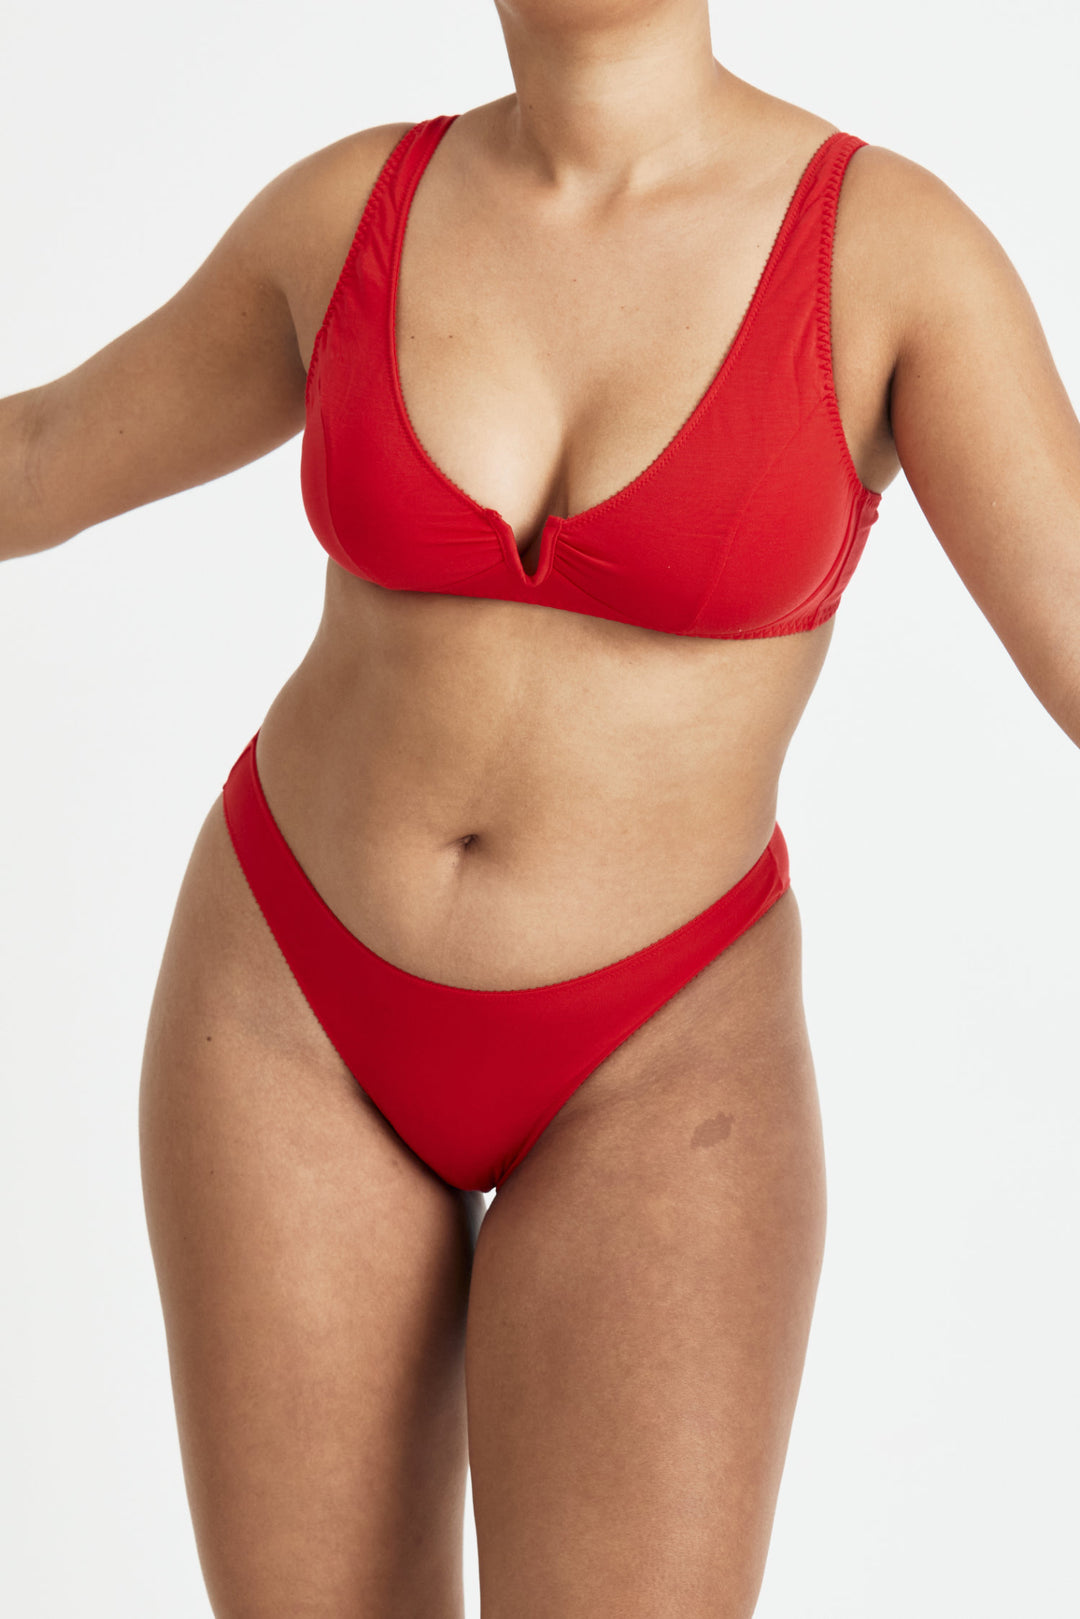 Videris Lingerie Sarah underwire free soft cup bra in red TENCEL™ features a scooped plunge cup and front gathers